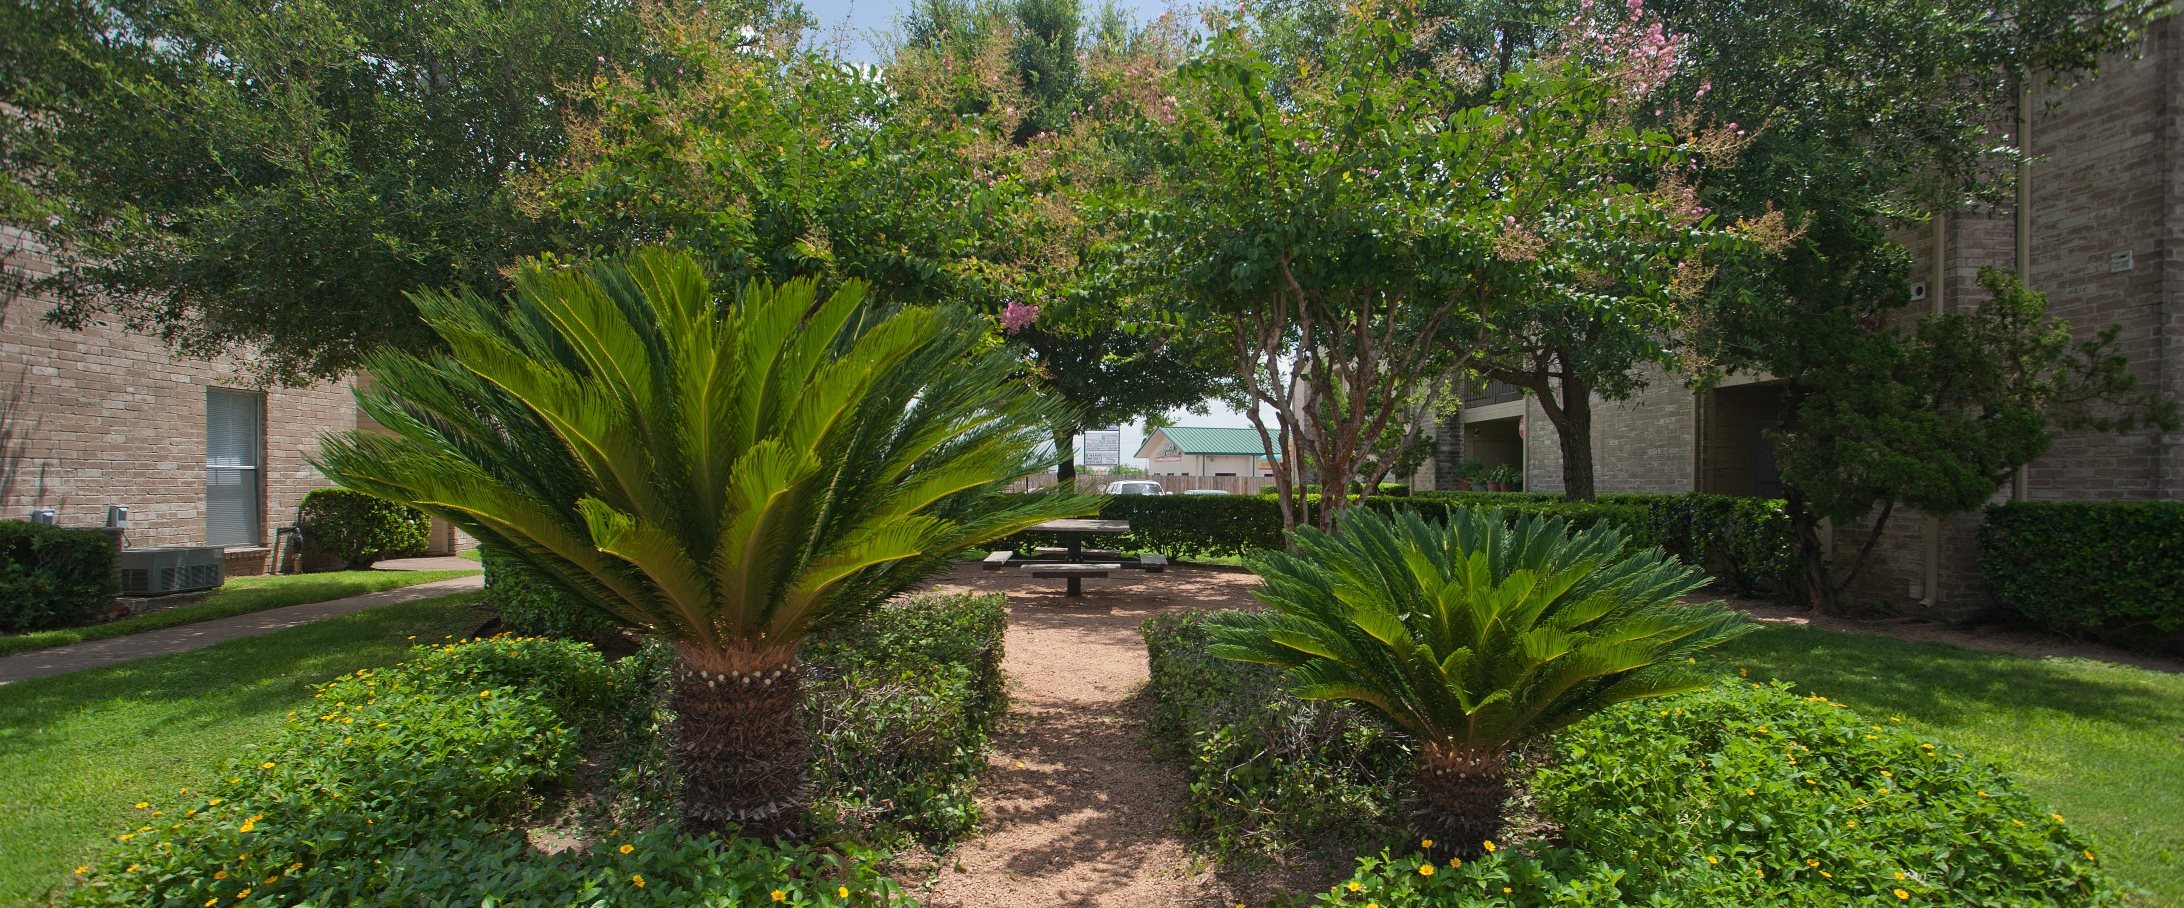 Courtyard Picnic Area with Foliage